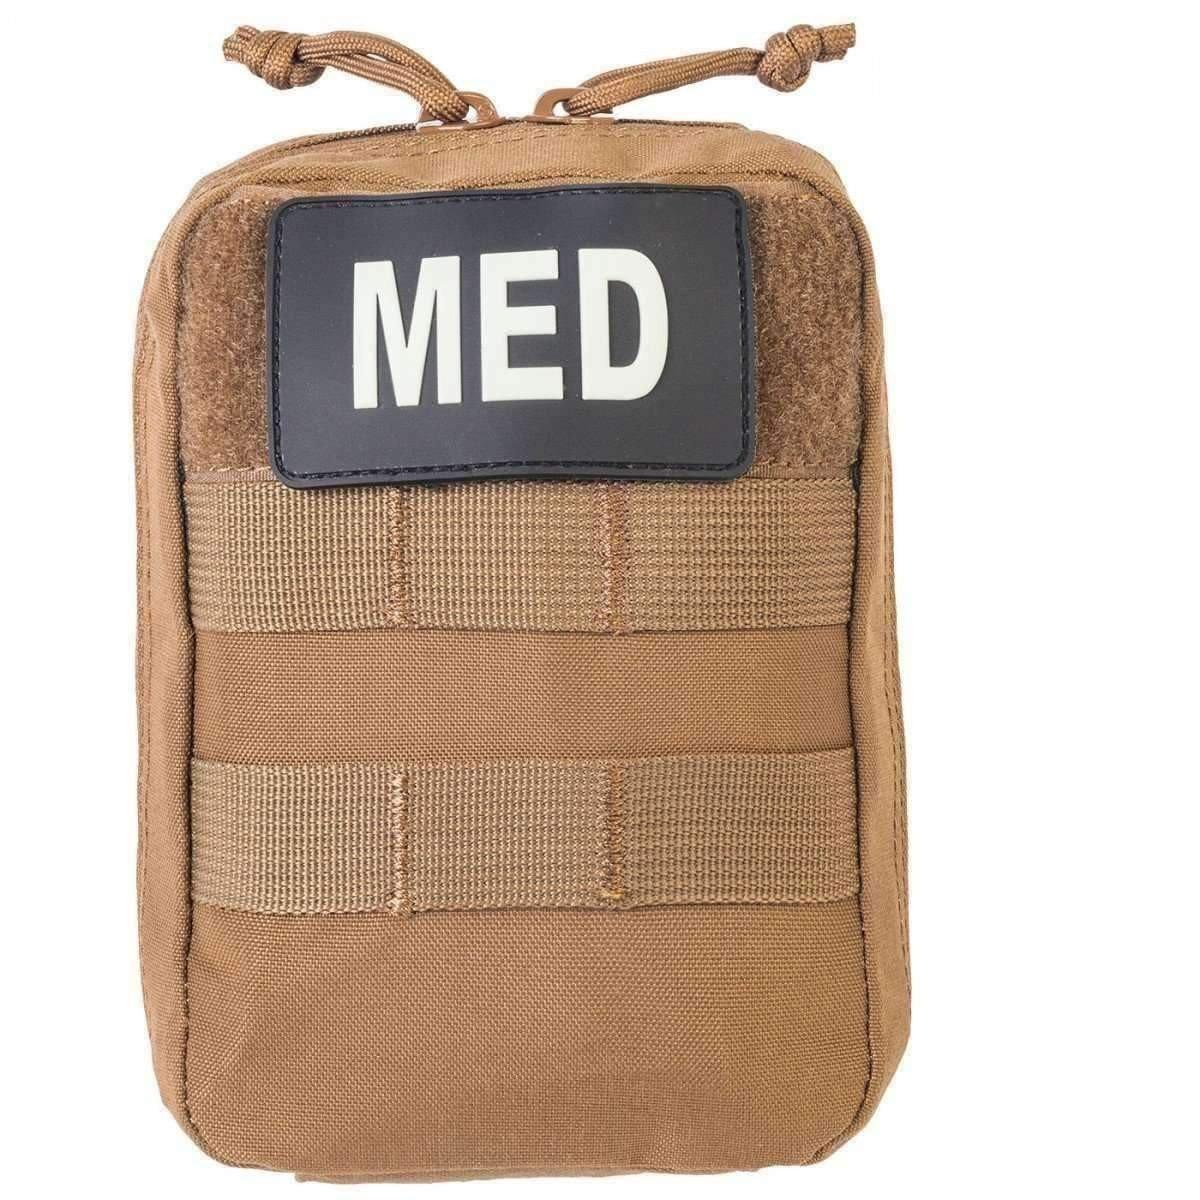 SOLO First Aid Kit - Vendor